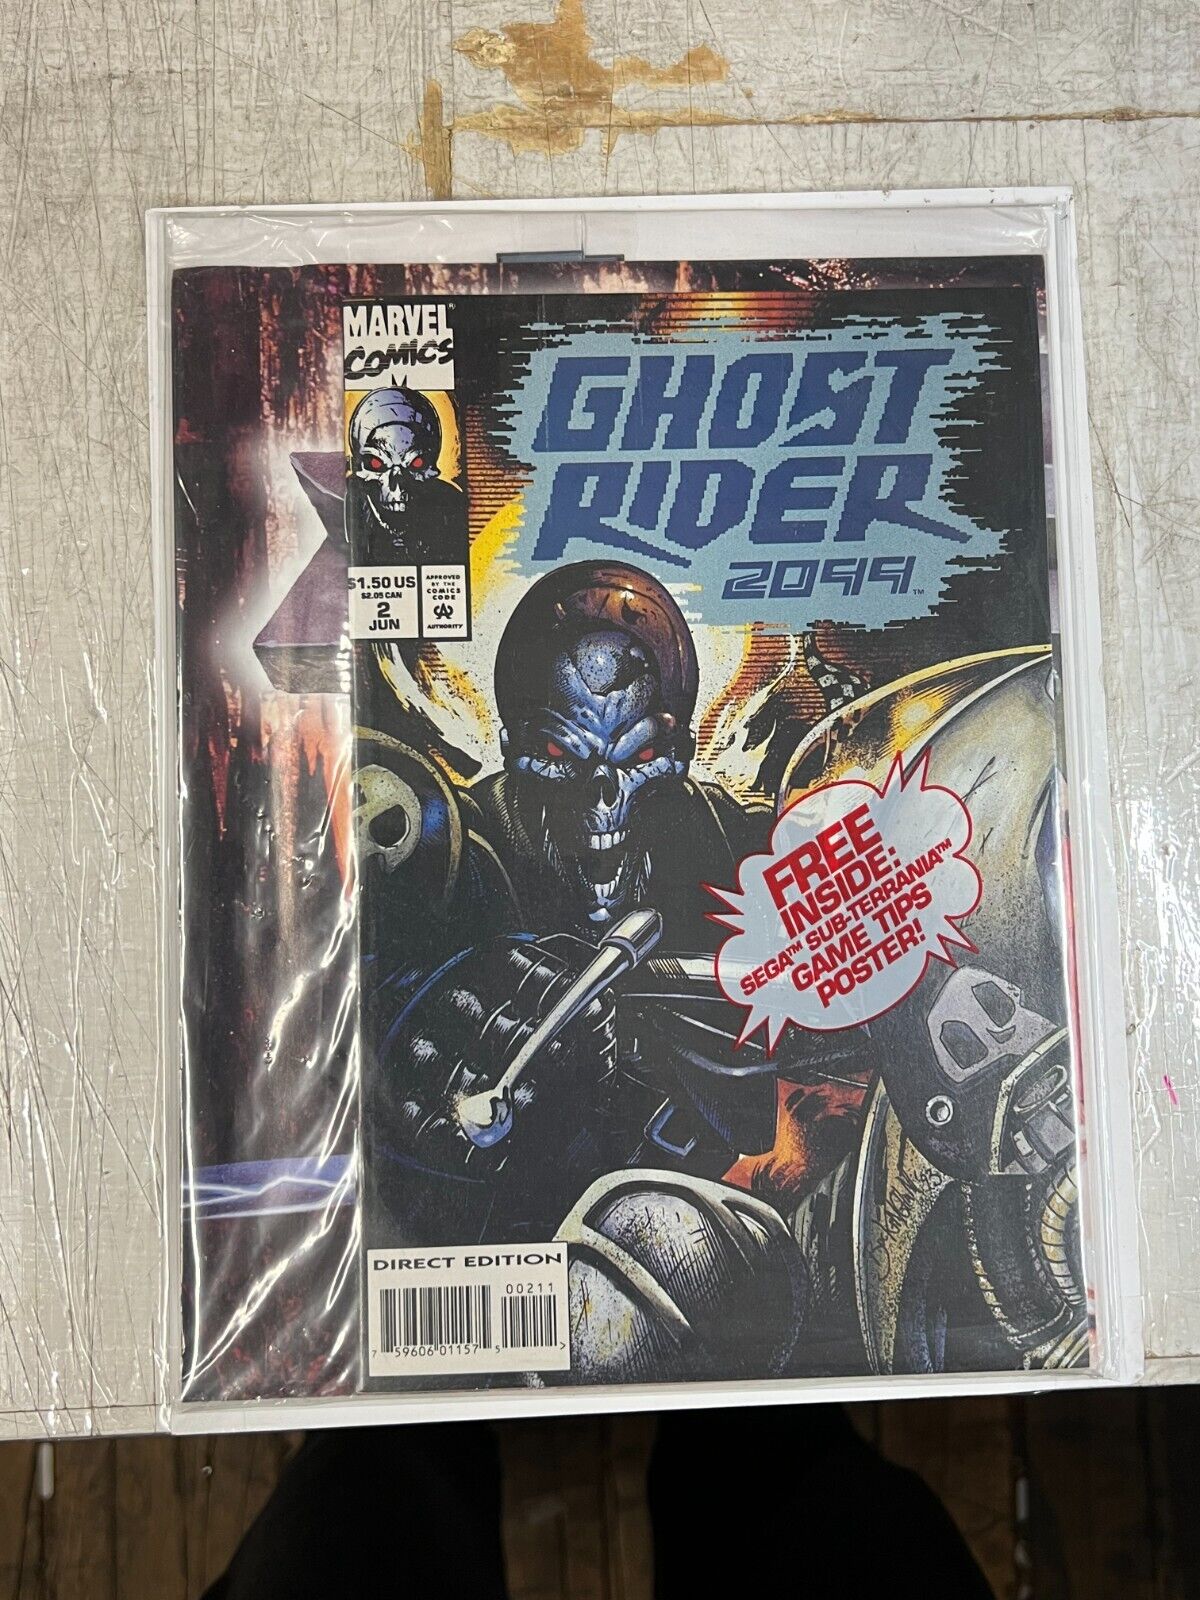 MARVEL COMICS: GHOST RIDER 2099 #2 JUNE 1994 Sealed with Poster | Comb Ship 